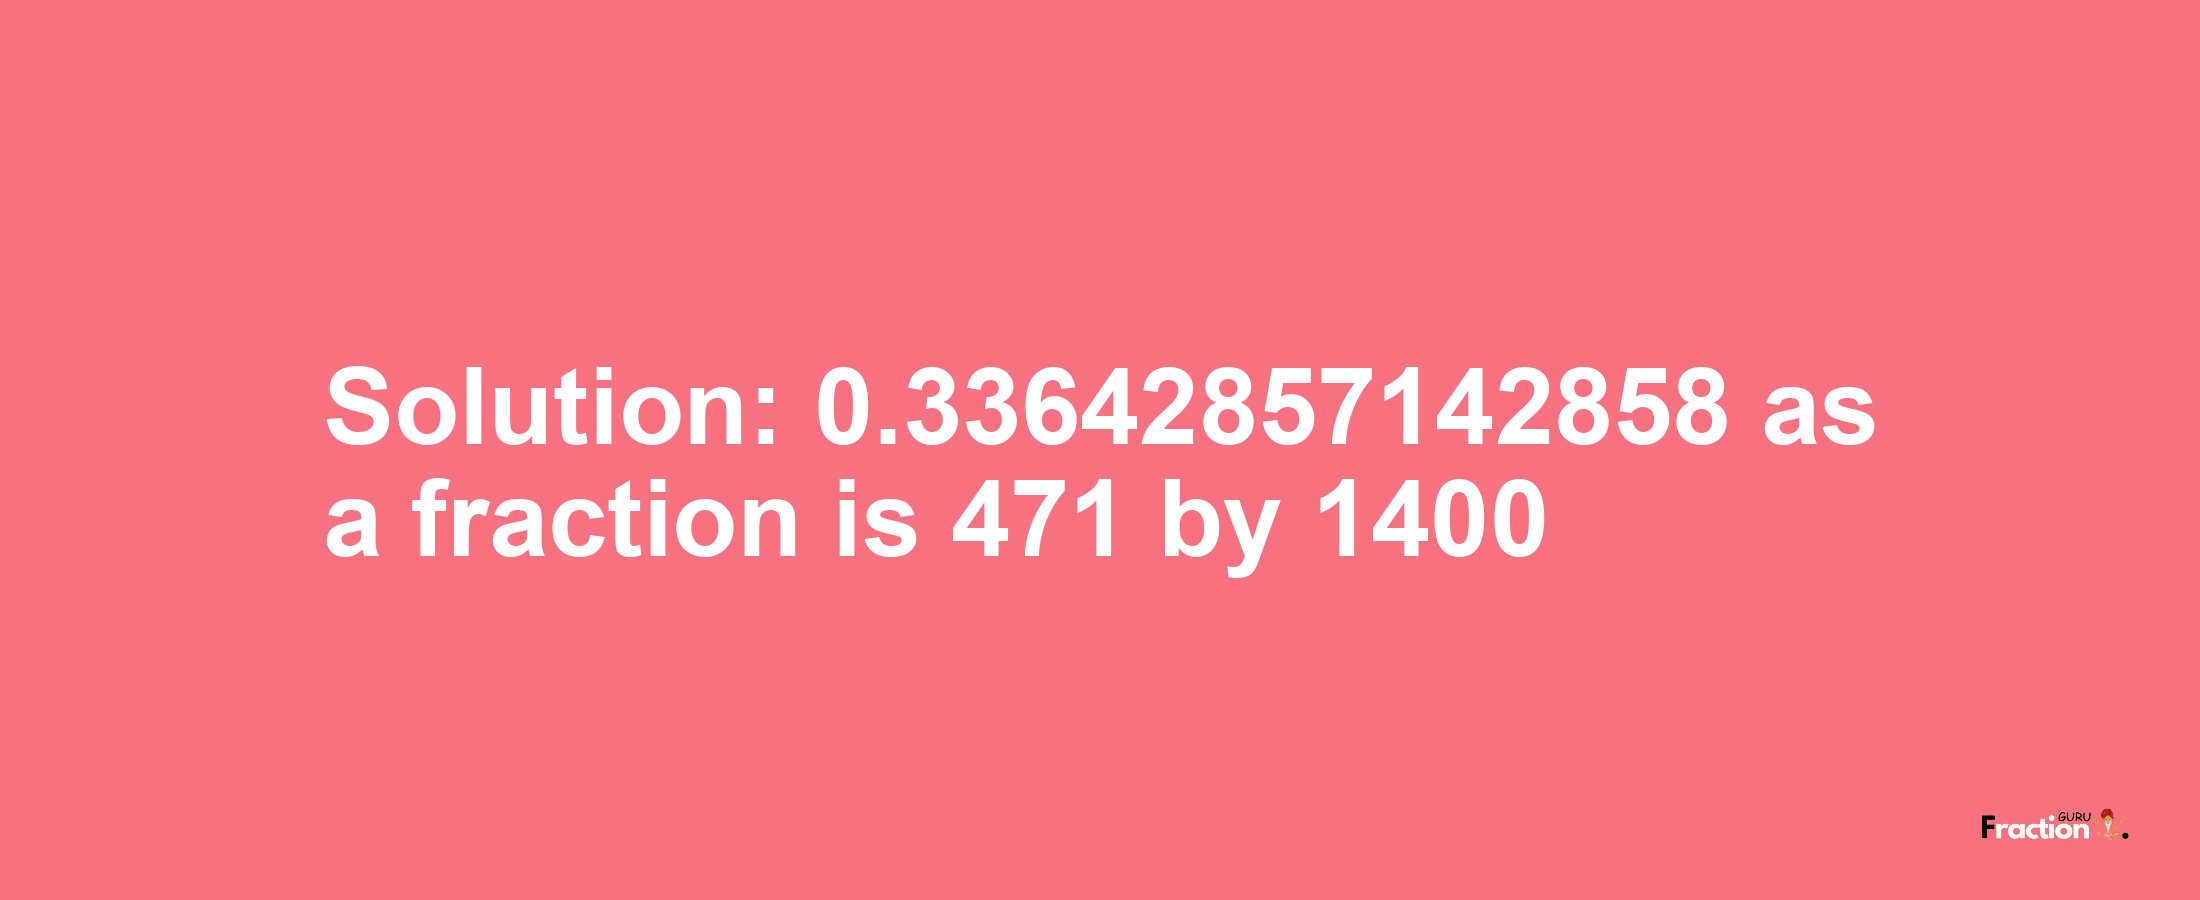 Solution:0.33642857142858 as a fraction is 471/1400